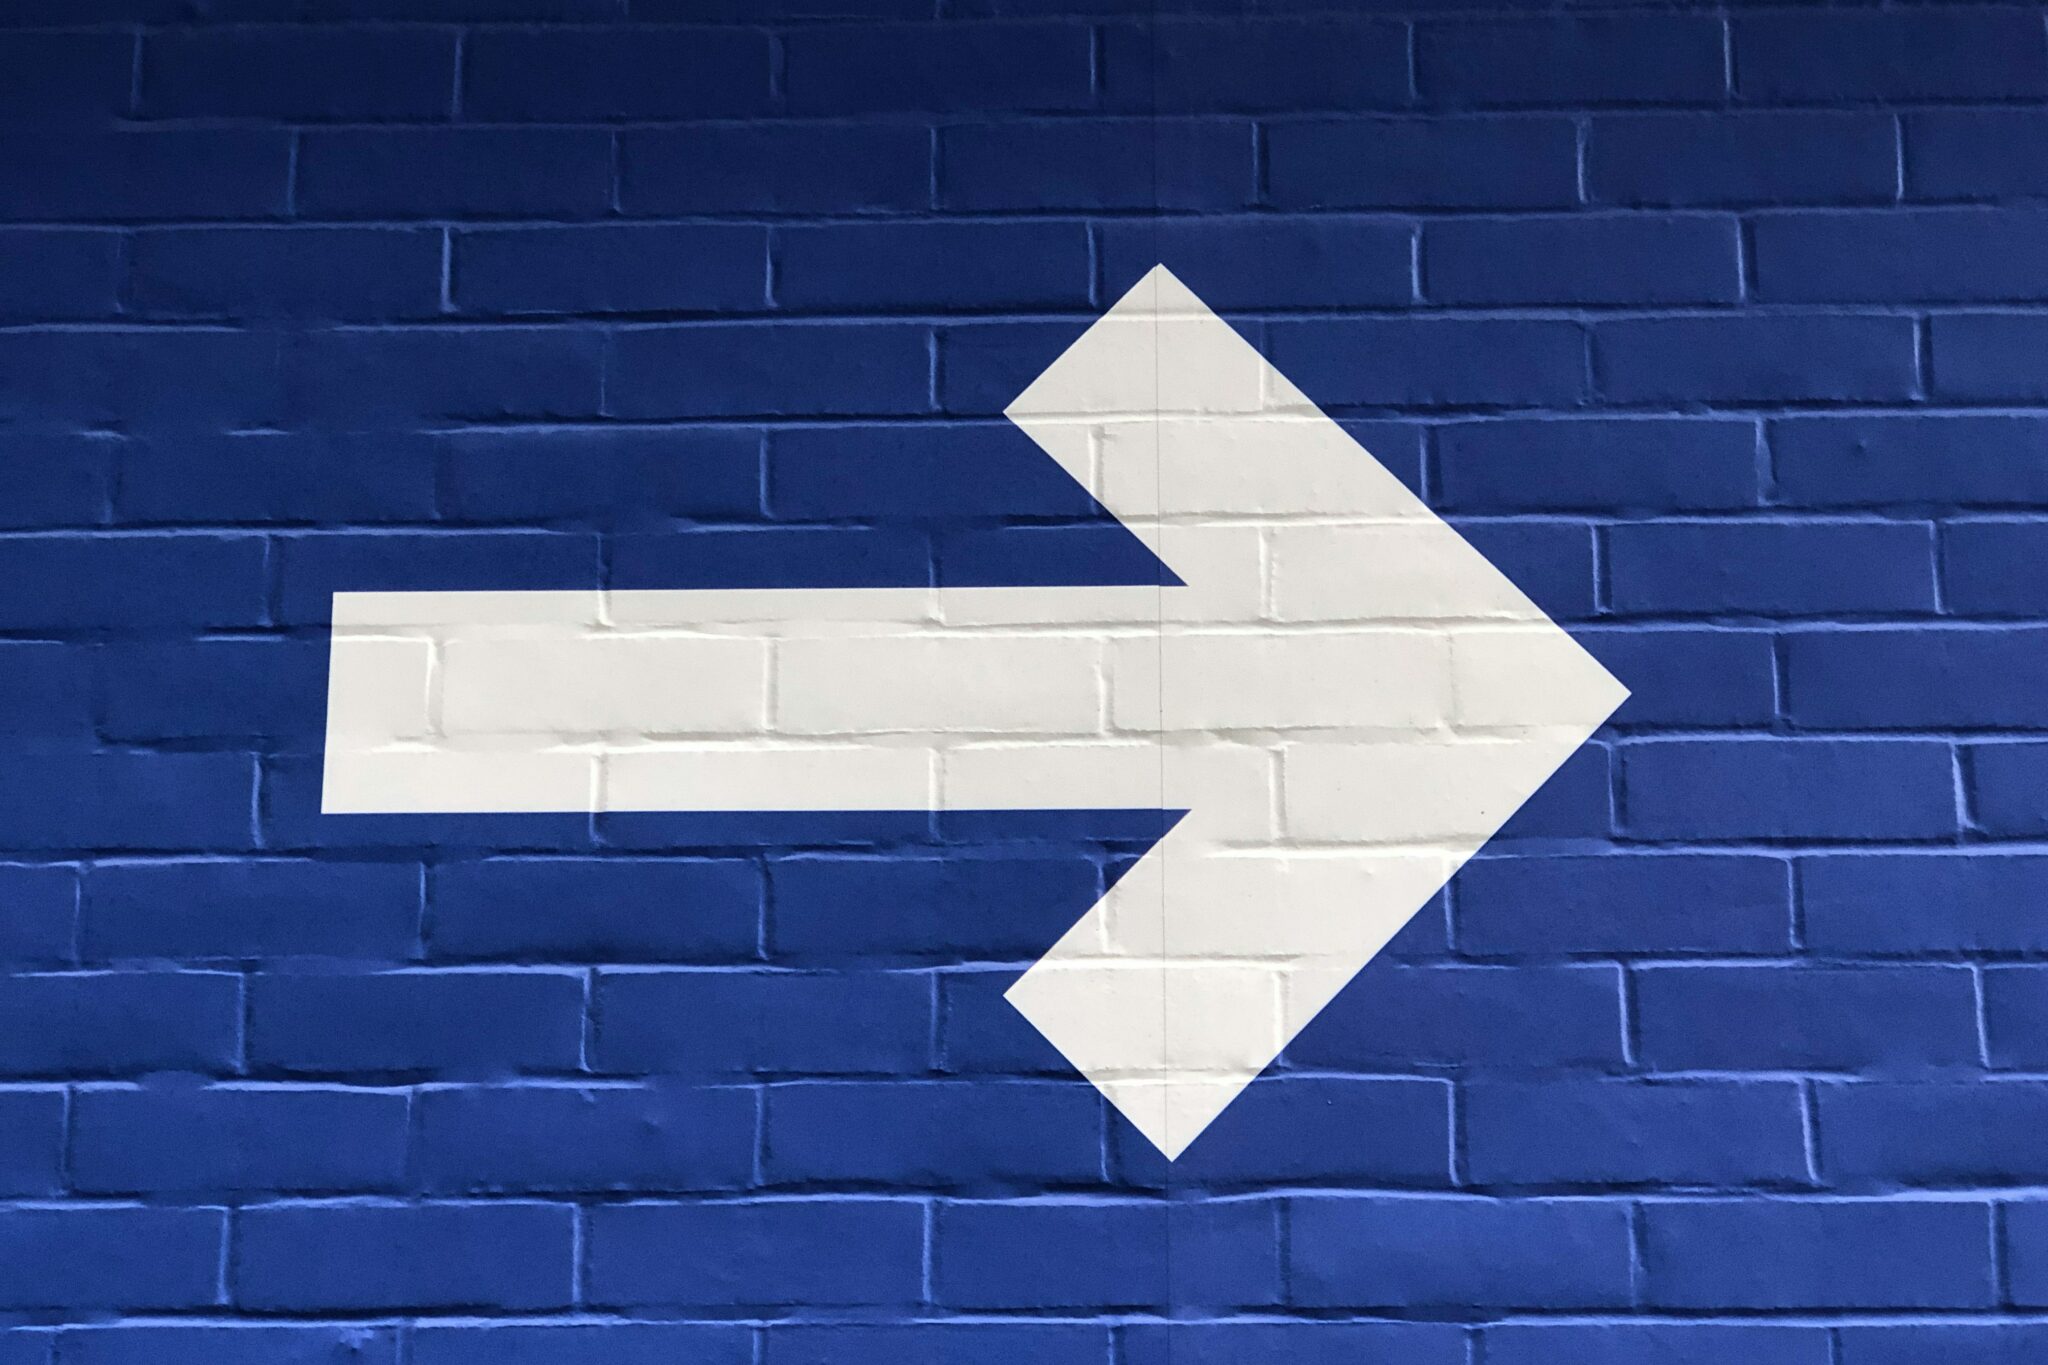 white arrow painted on blue brick wall